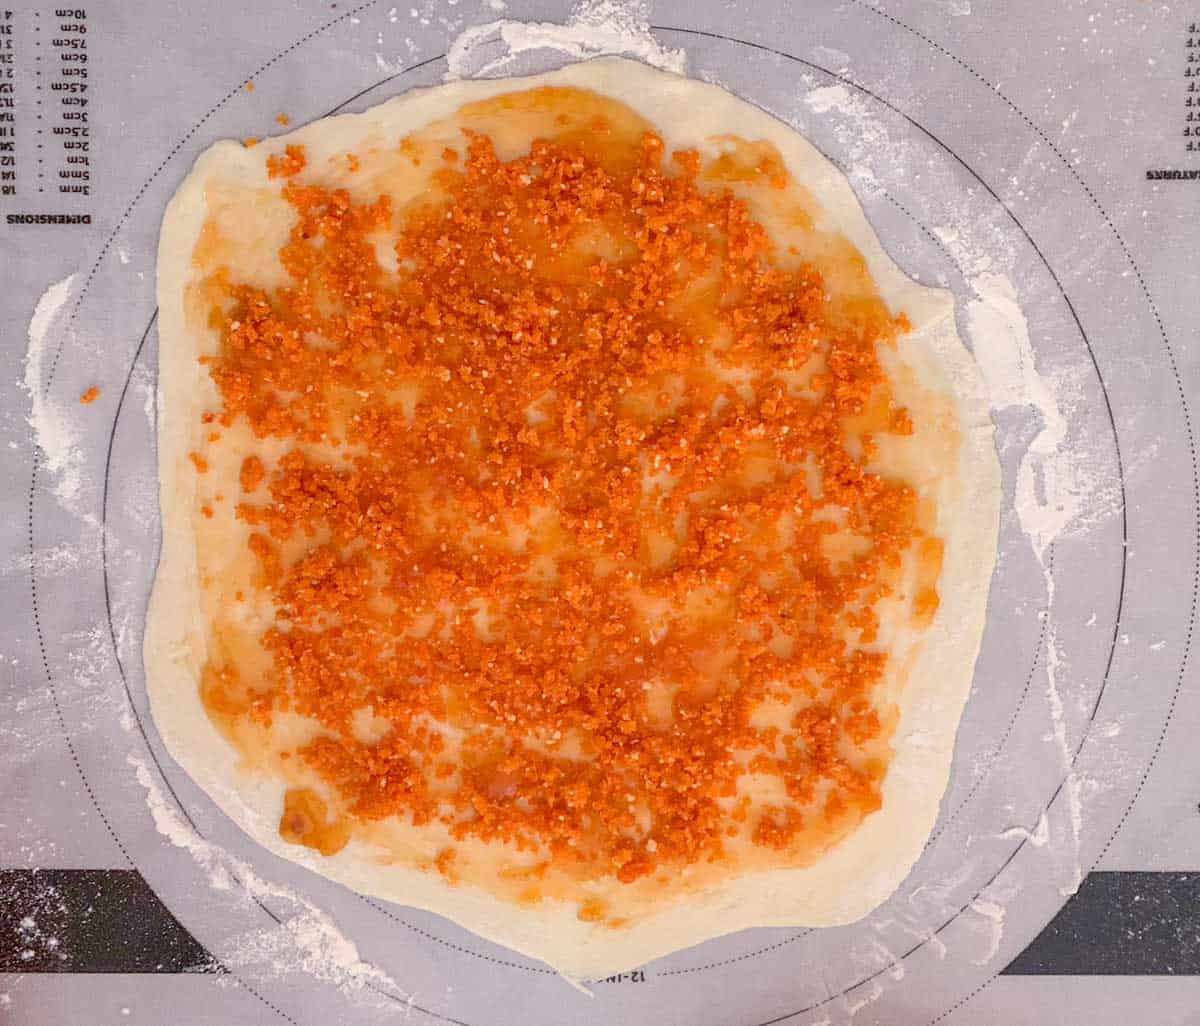 Dried apricots and almond mixture is spread on top of the apricot preserves.